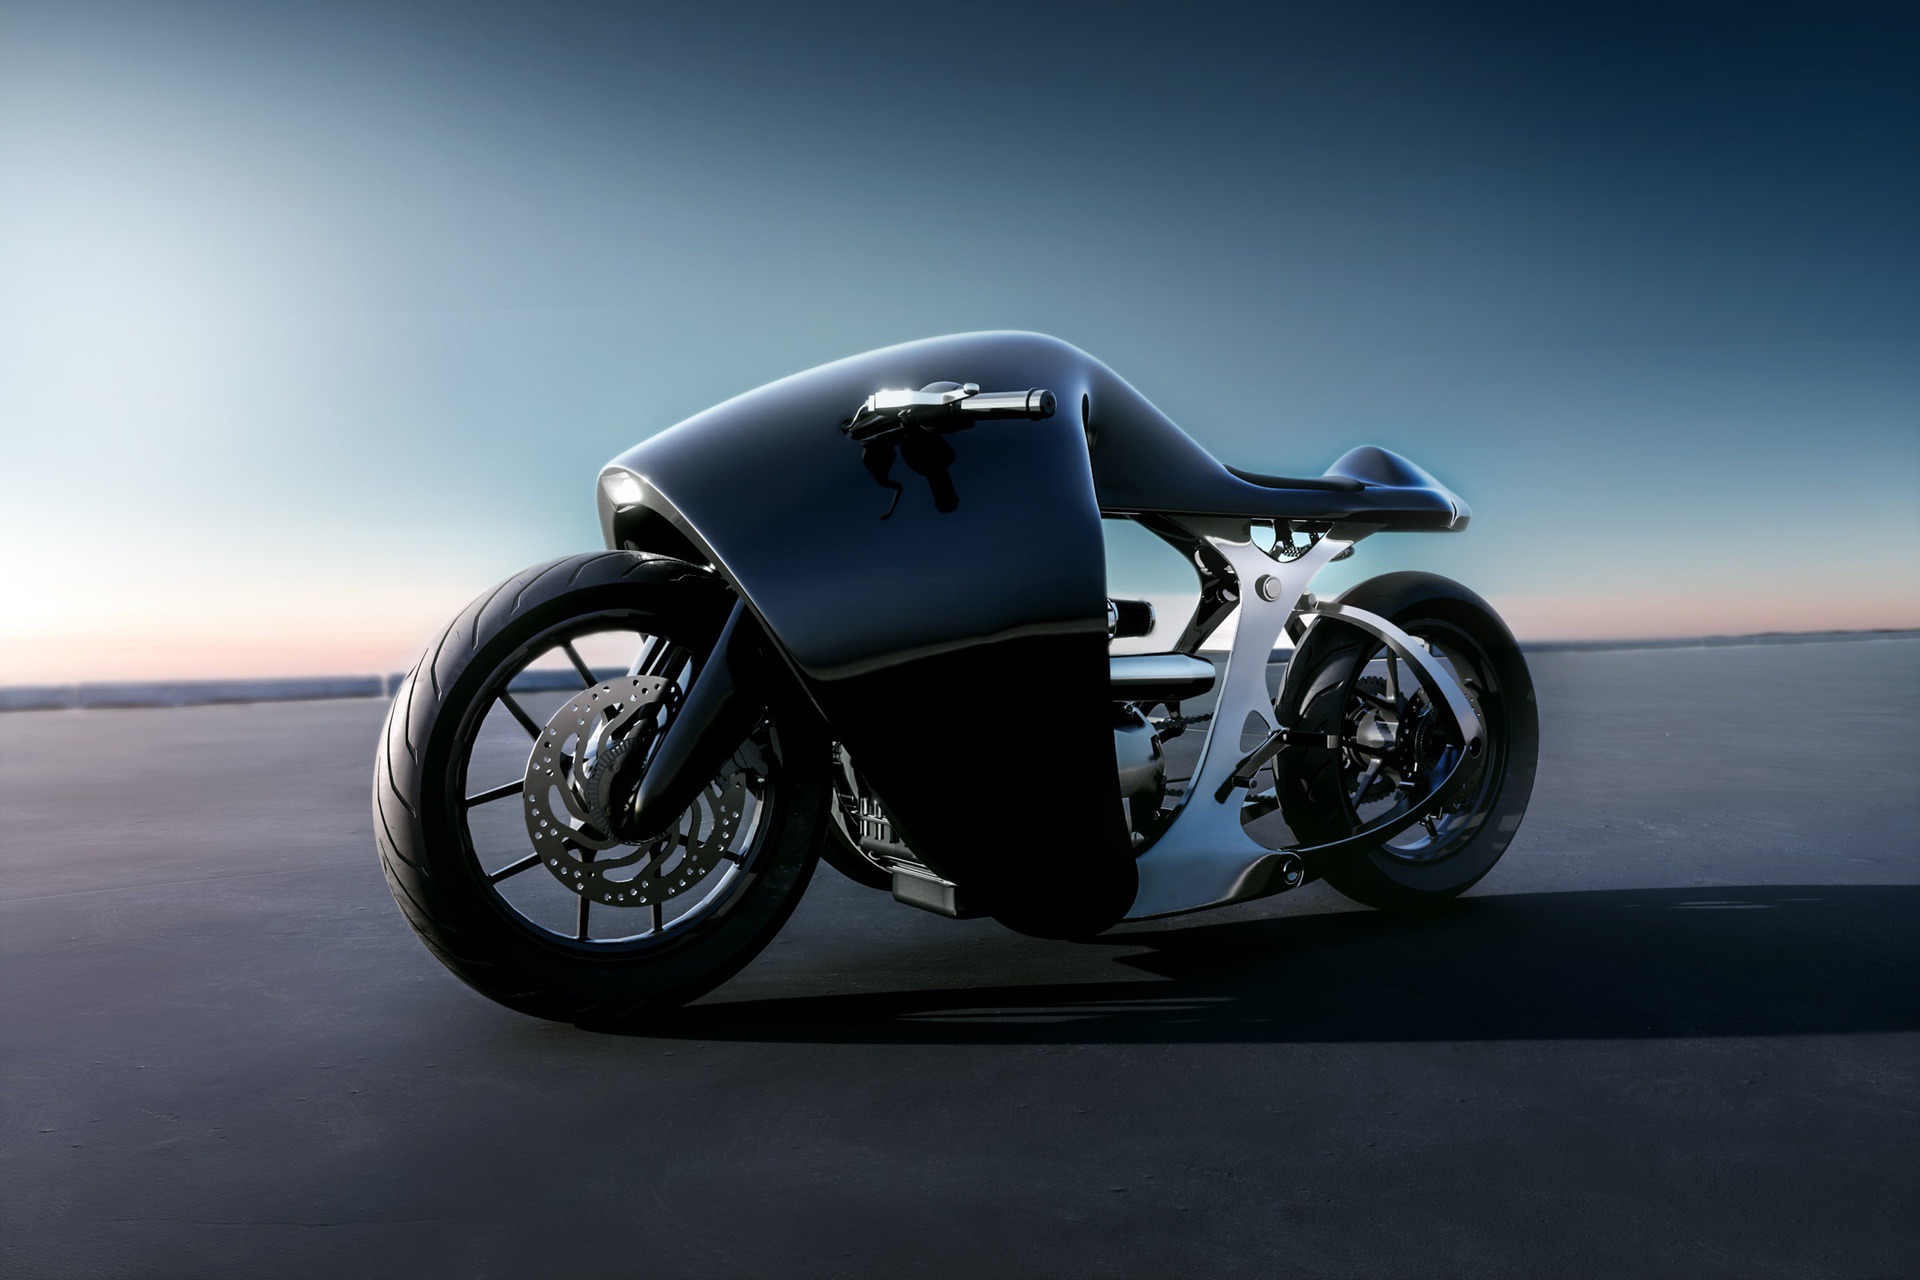 Side view of Bandit9 Supermarine Custom Racer motorcycle on flats at sunrise